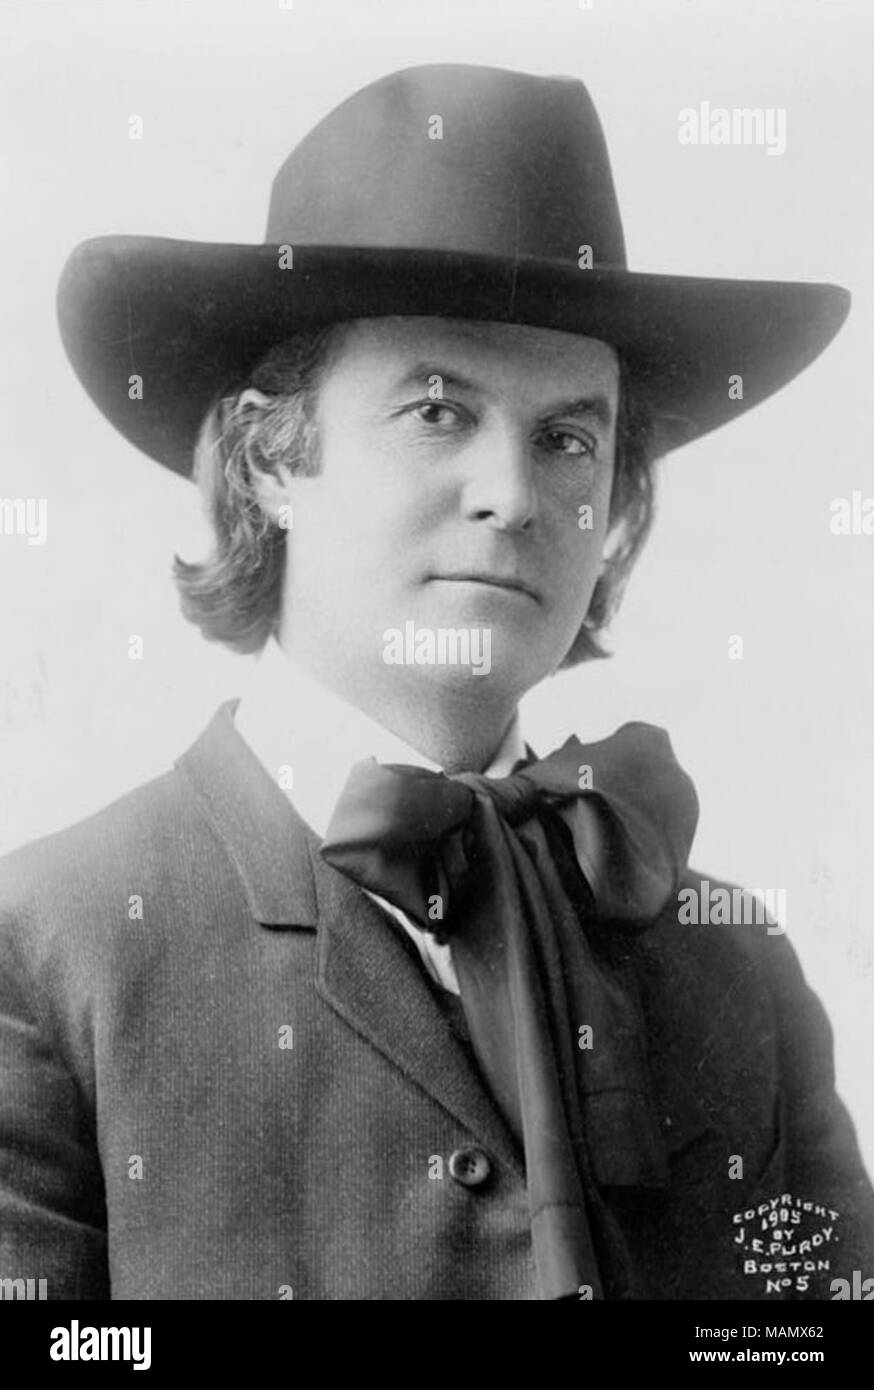 Elbert Hubbard, head-and-shoulders portrait, facing front. Library of Congress Prints and Photographs Division  . circa 1905.   James E. Purdy - Stock Photo